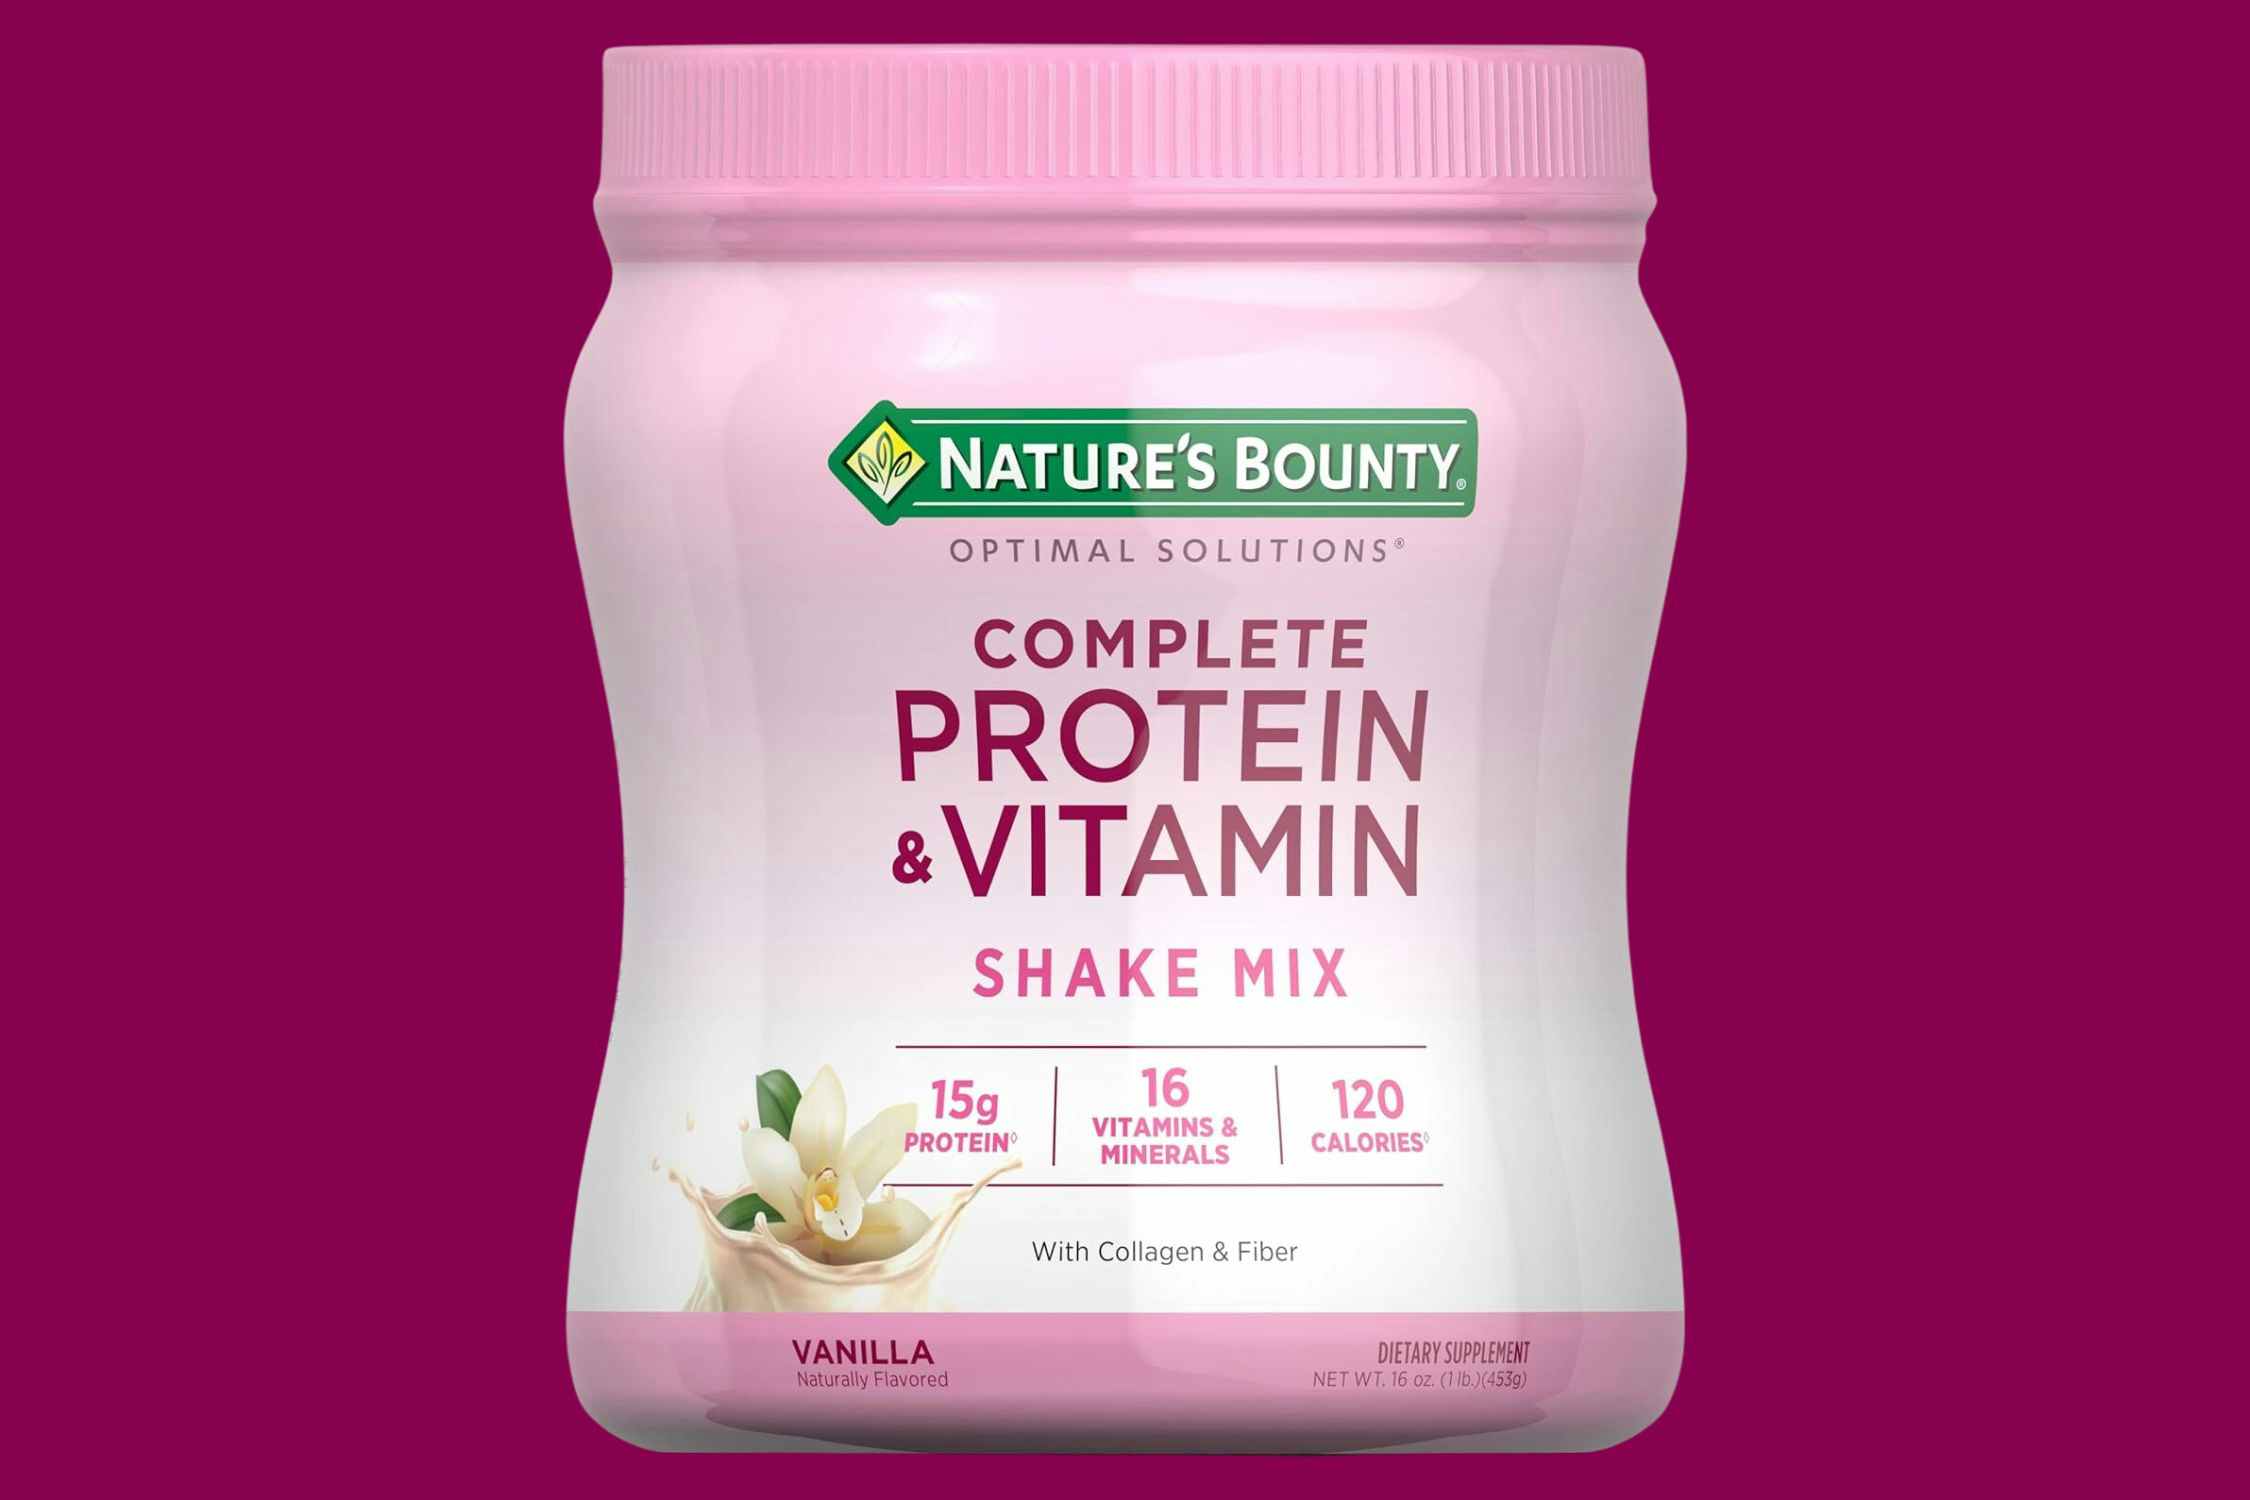 Nature's Bounty Vitamin Shake Mix, as Low as $12.64 on Amazon